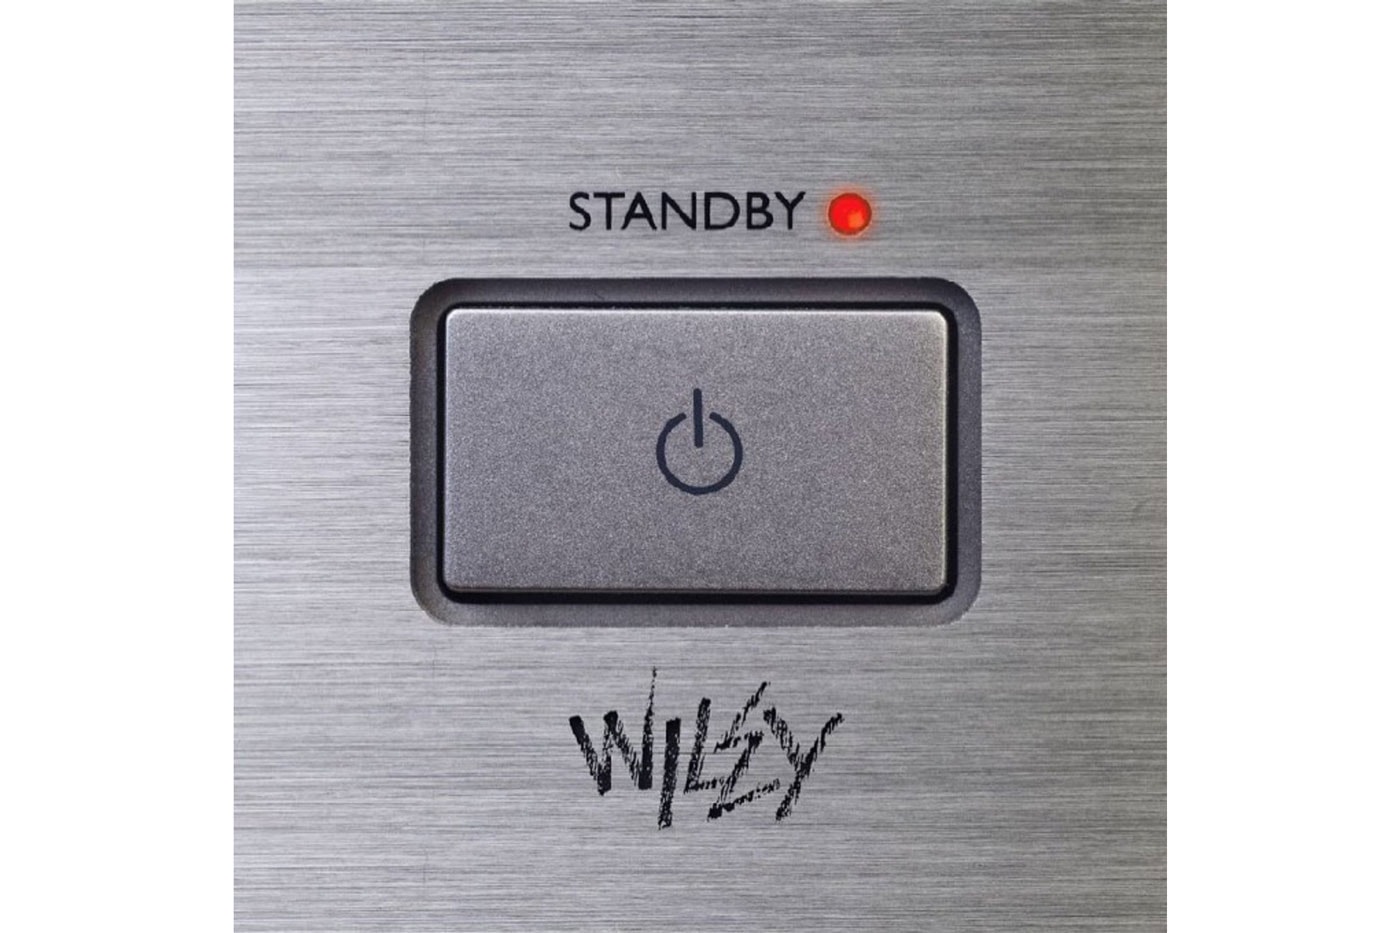 Listen To Wiley's New Single "Standby"